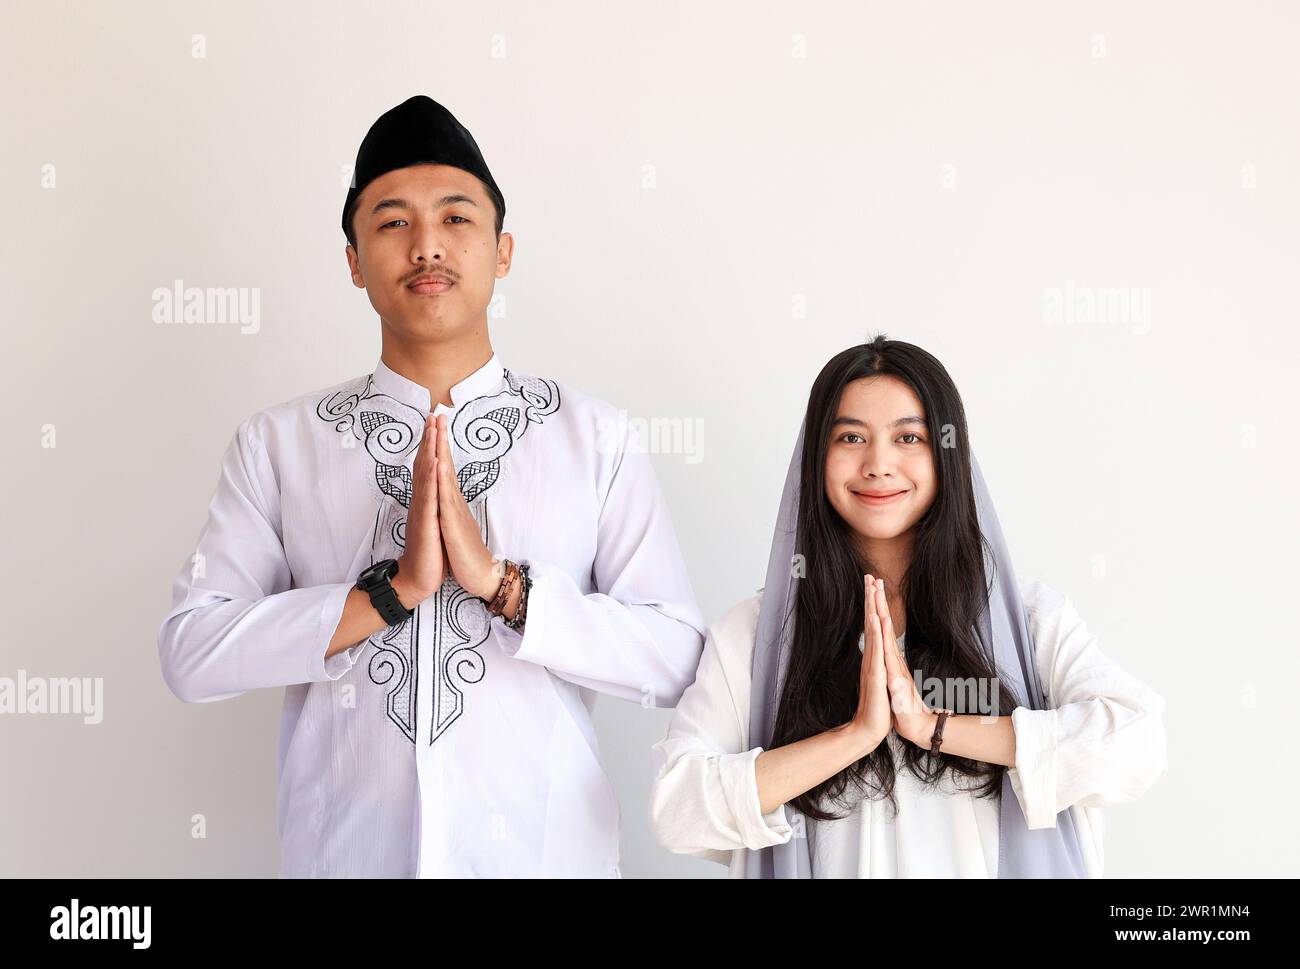 Asian Muslim Male and Female Doing Hari Raya Lebaran Greeting Gesture.  Eid Al Fitr Concept. Isolated on White with Copy Space for Text Stock Photo